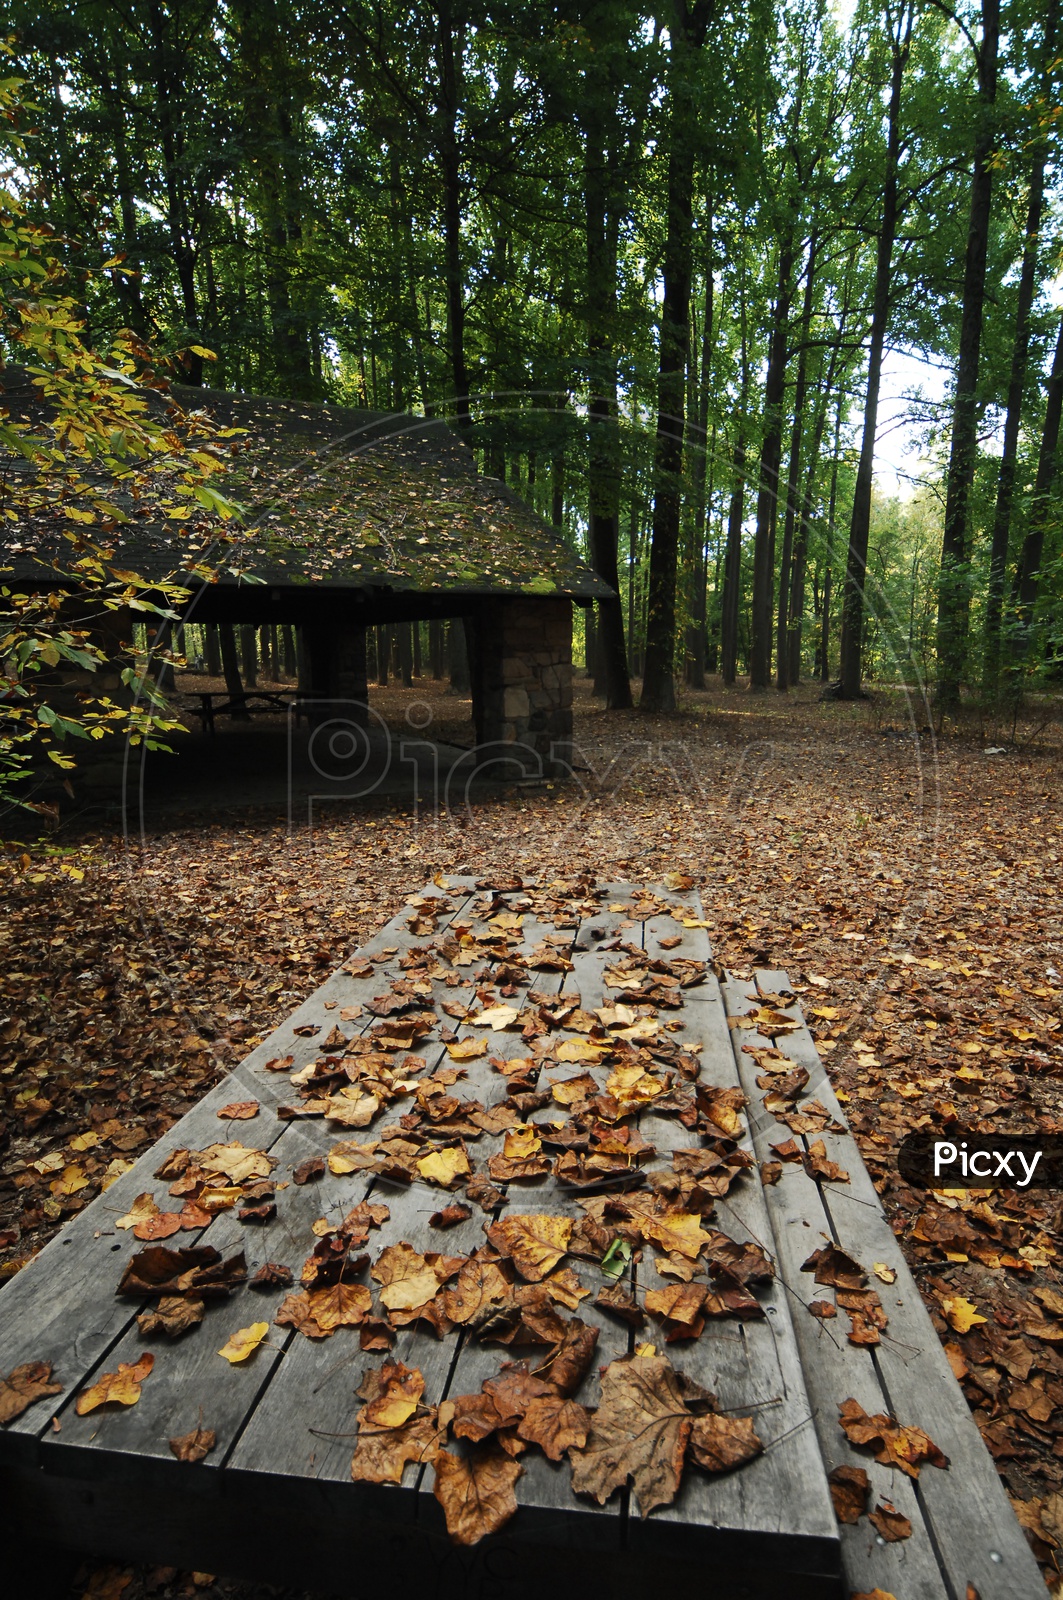 Autumn leaves on a wooden bench